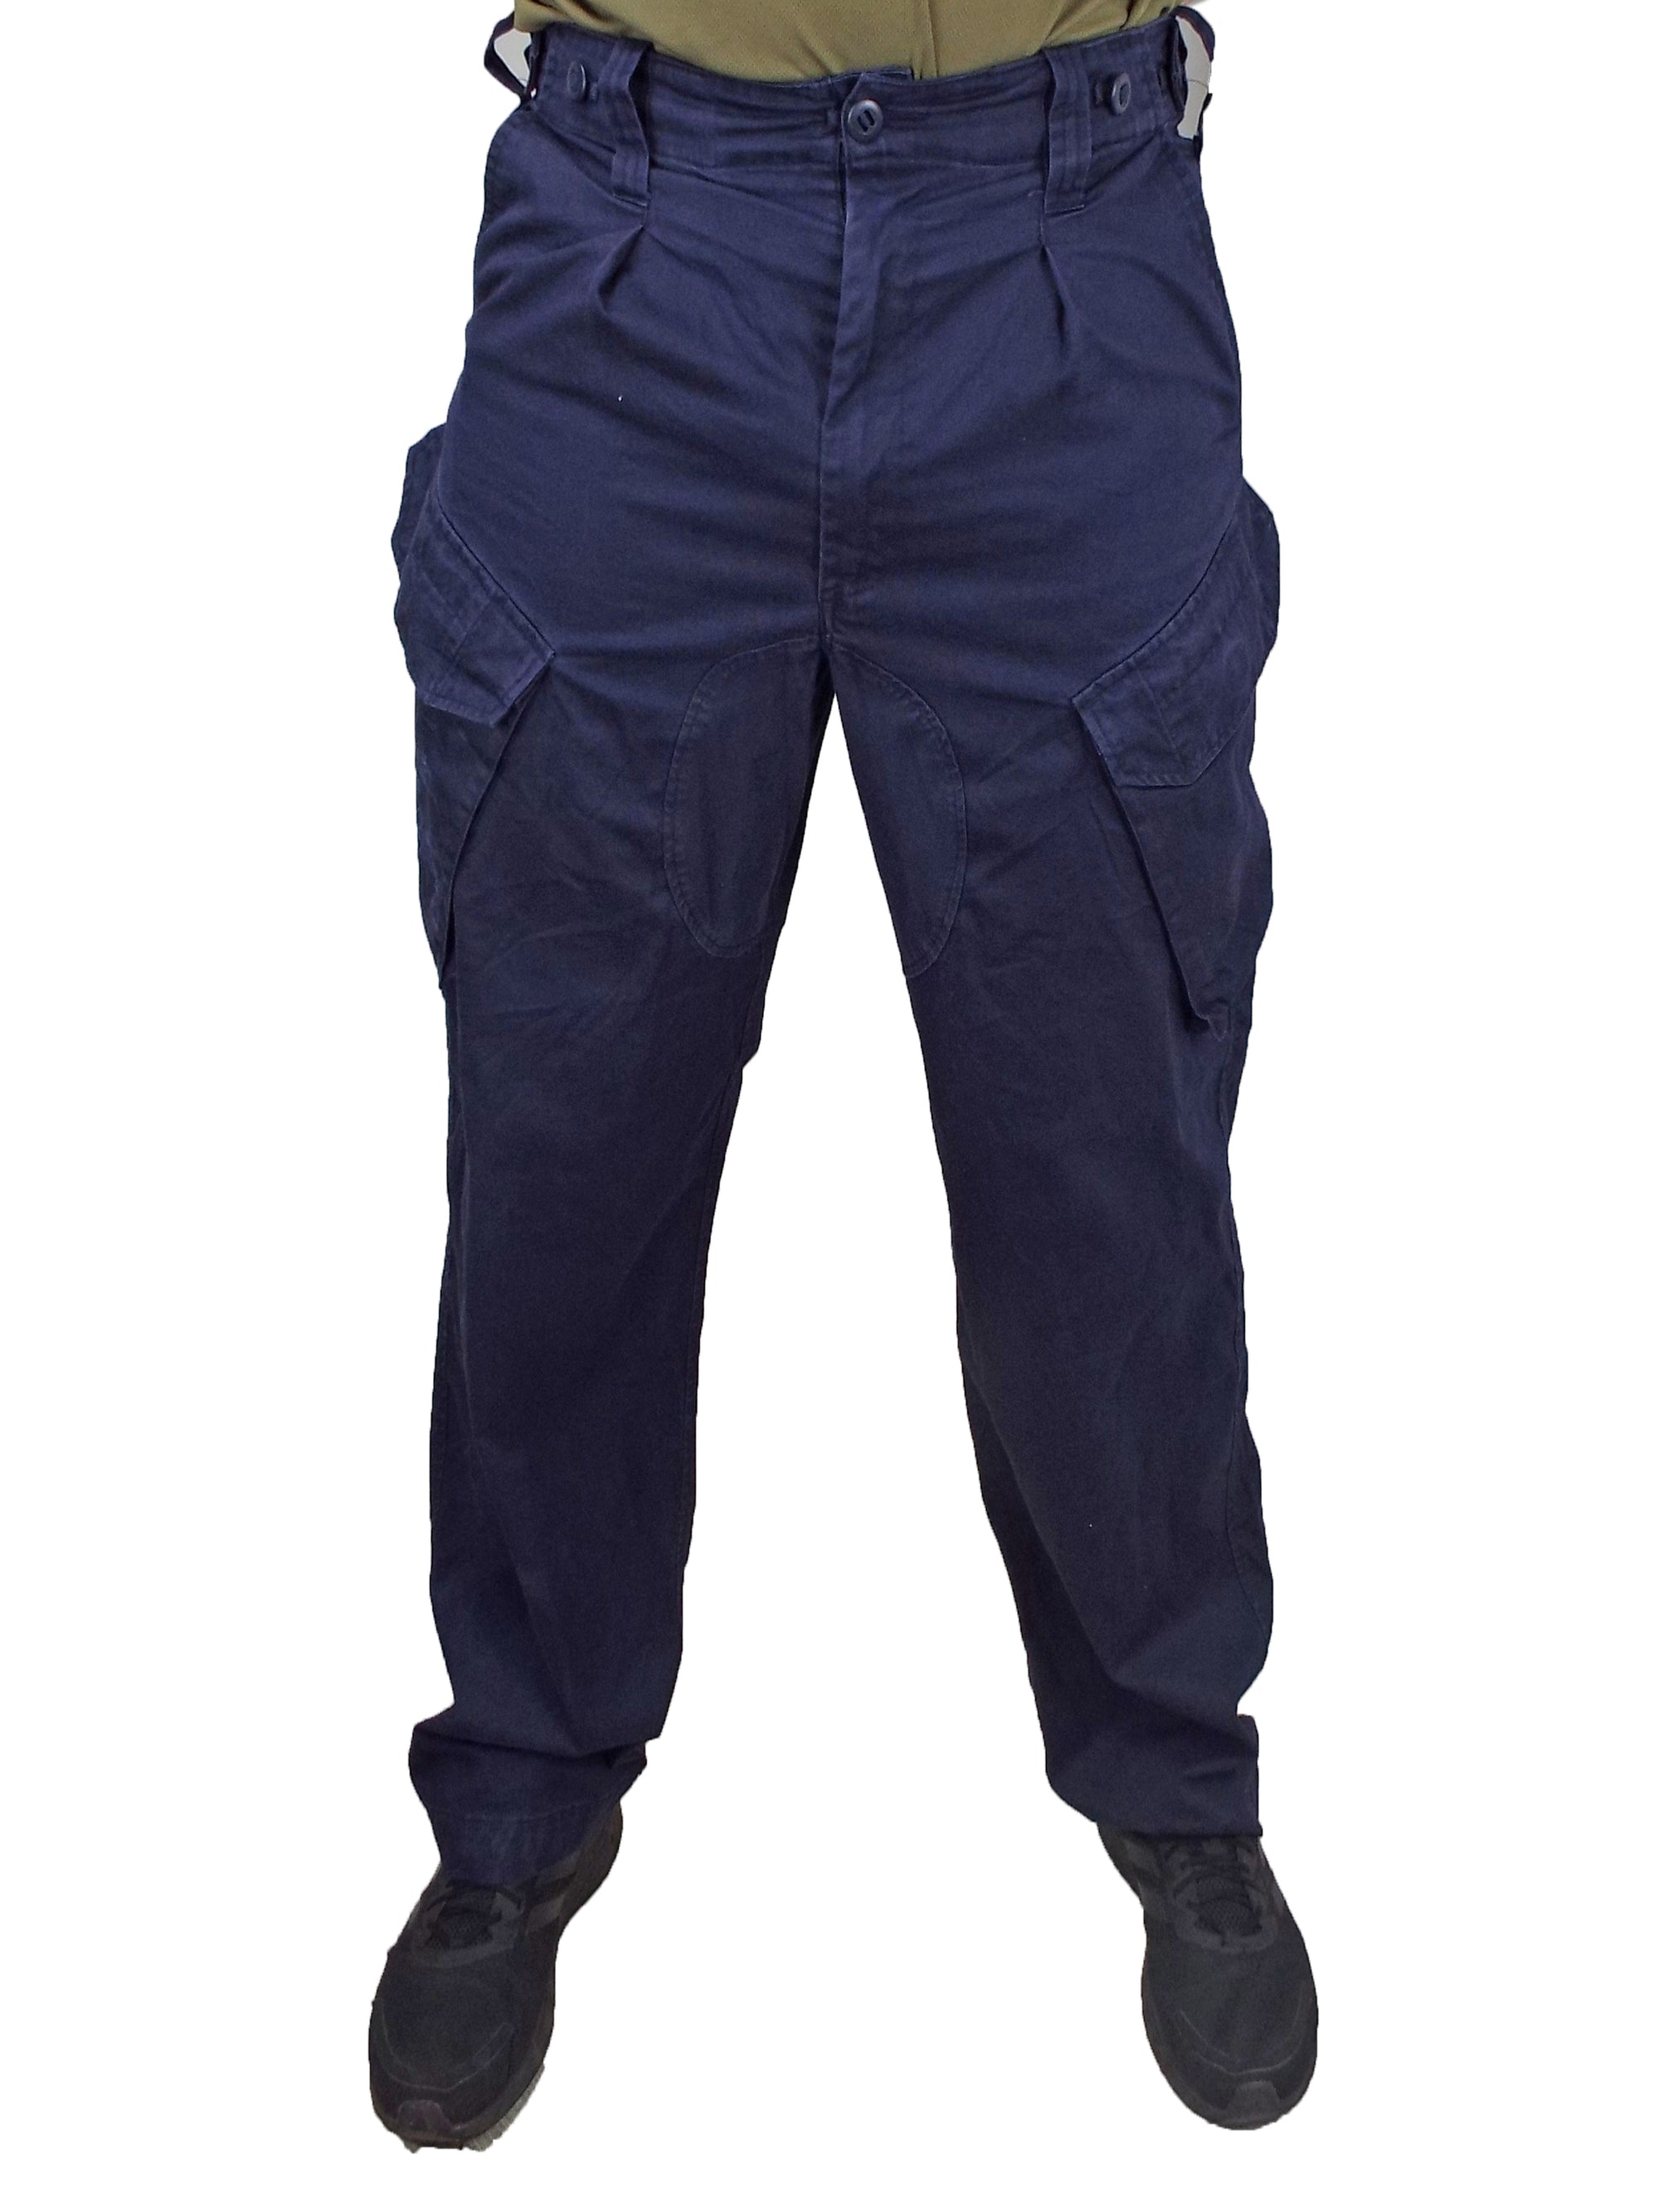 British Royal Navy Dark Blue Combat Trousers - Five pocket - current RN issue - Grade 1